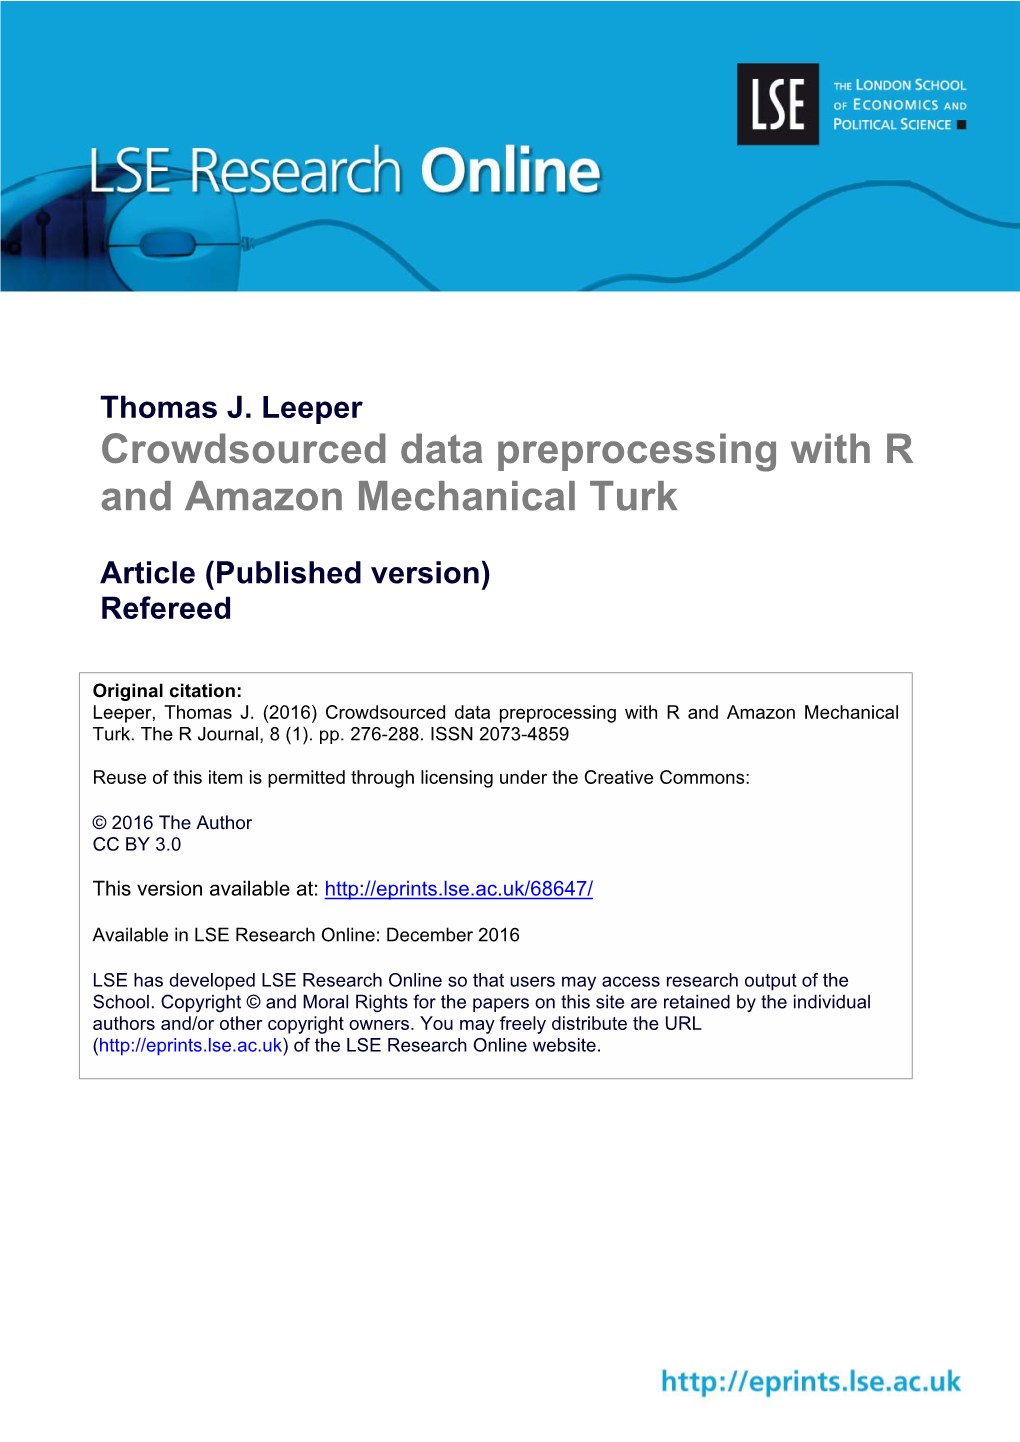 Crowdsourced Data Preprocessing with R and Amazon Mechanical Turk